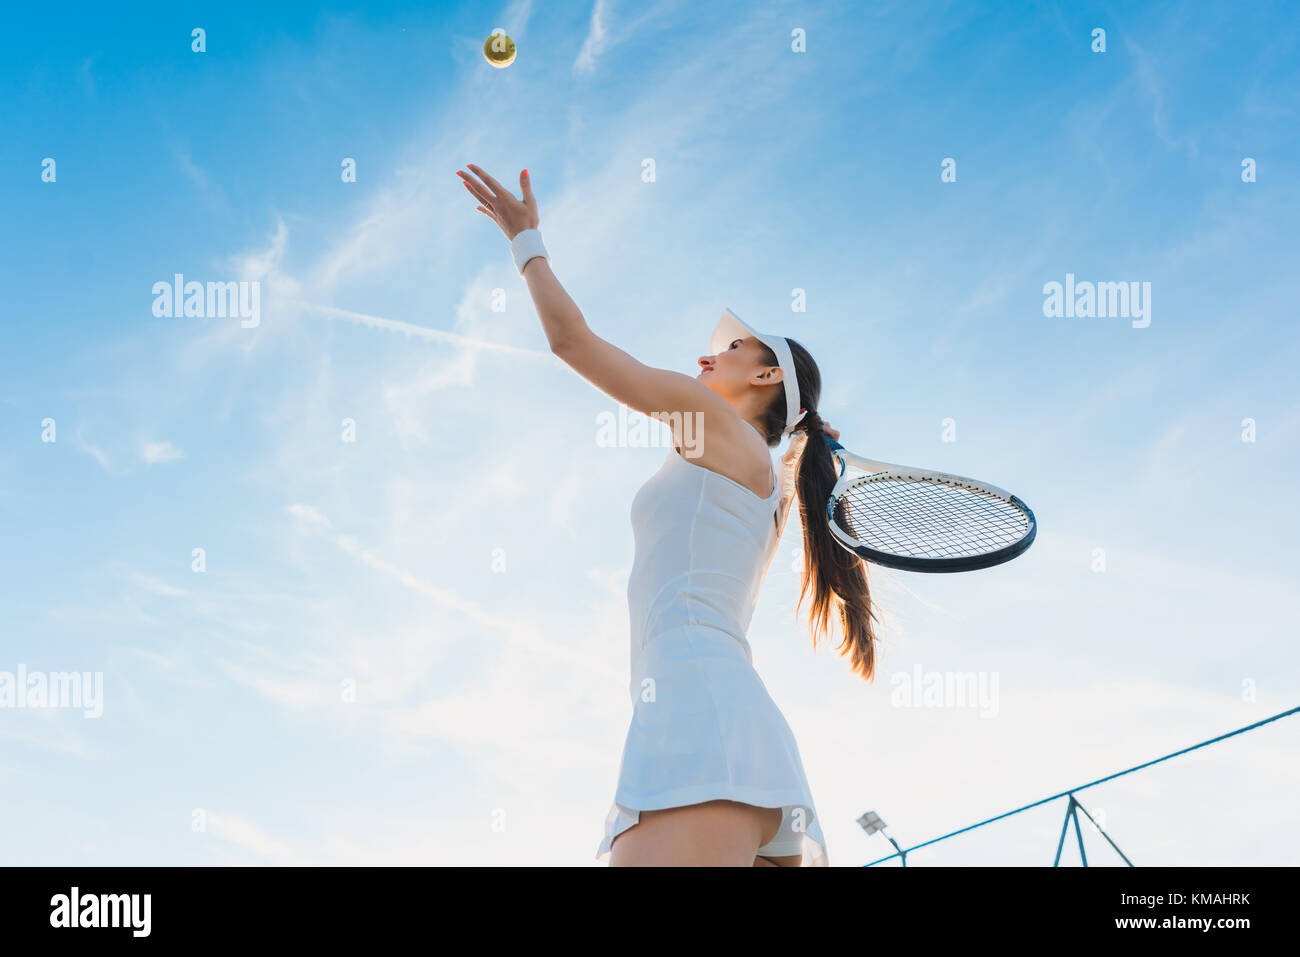 Woman playing tennis giving service Stock Photo